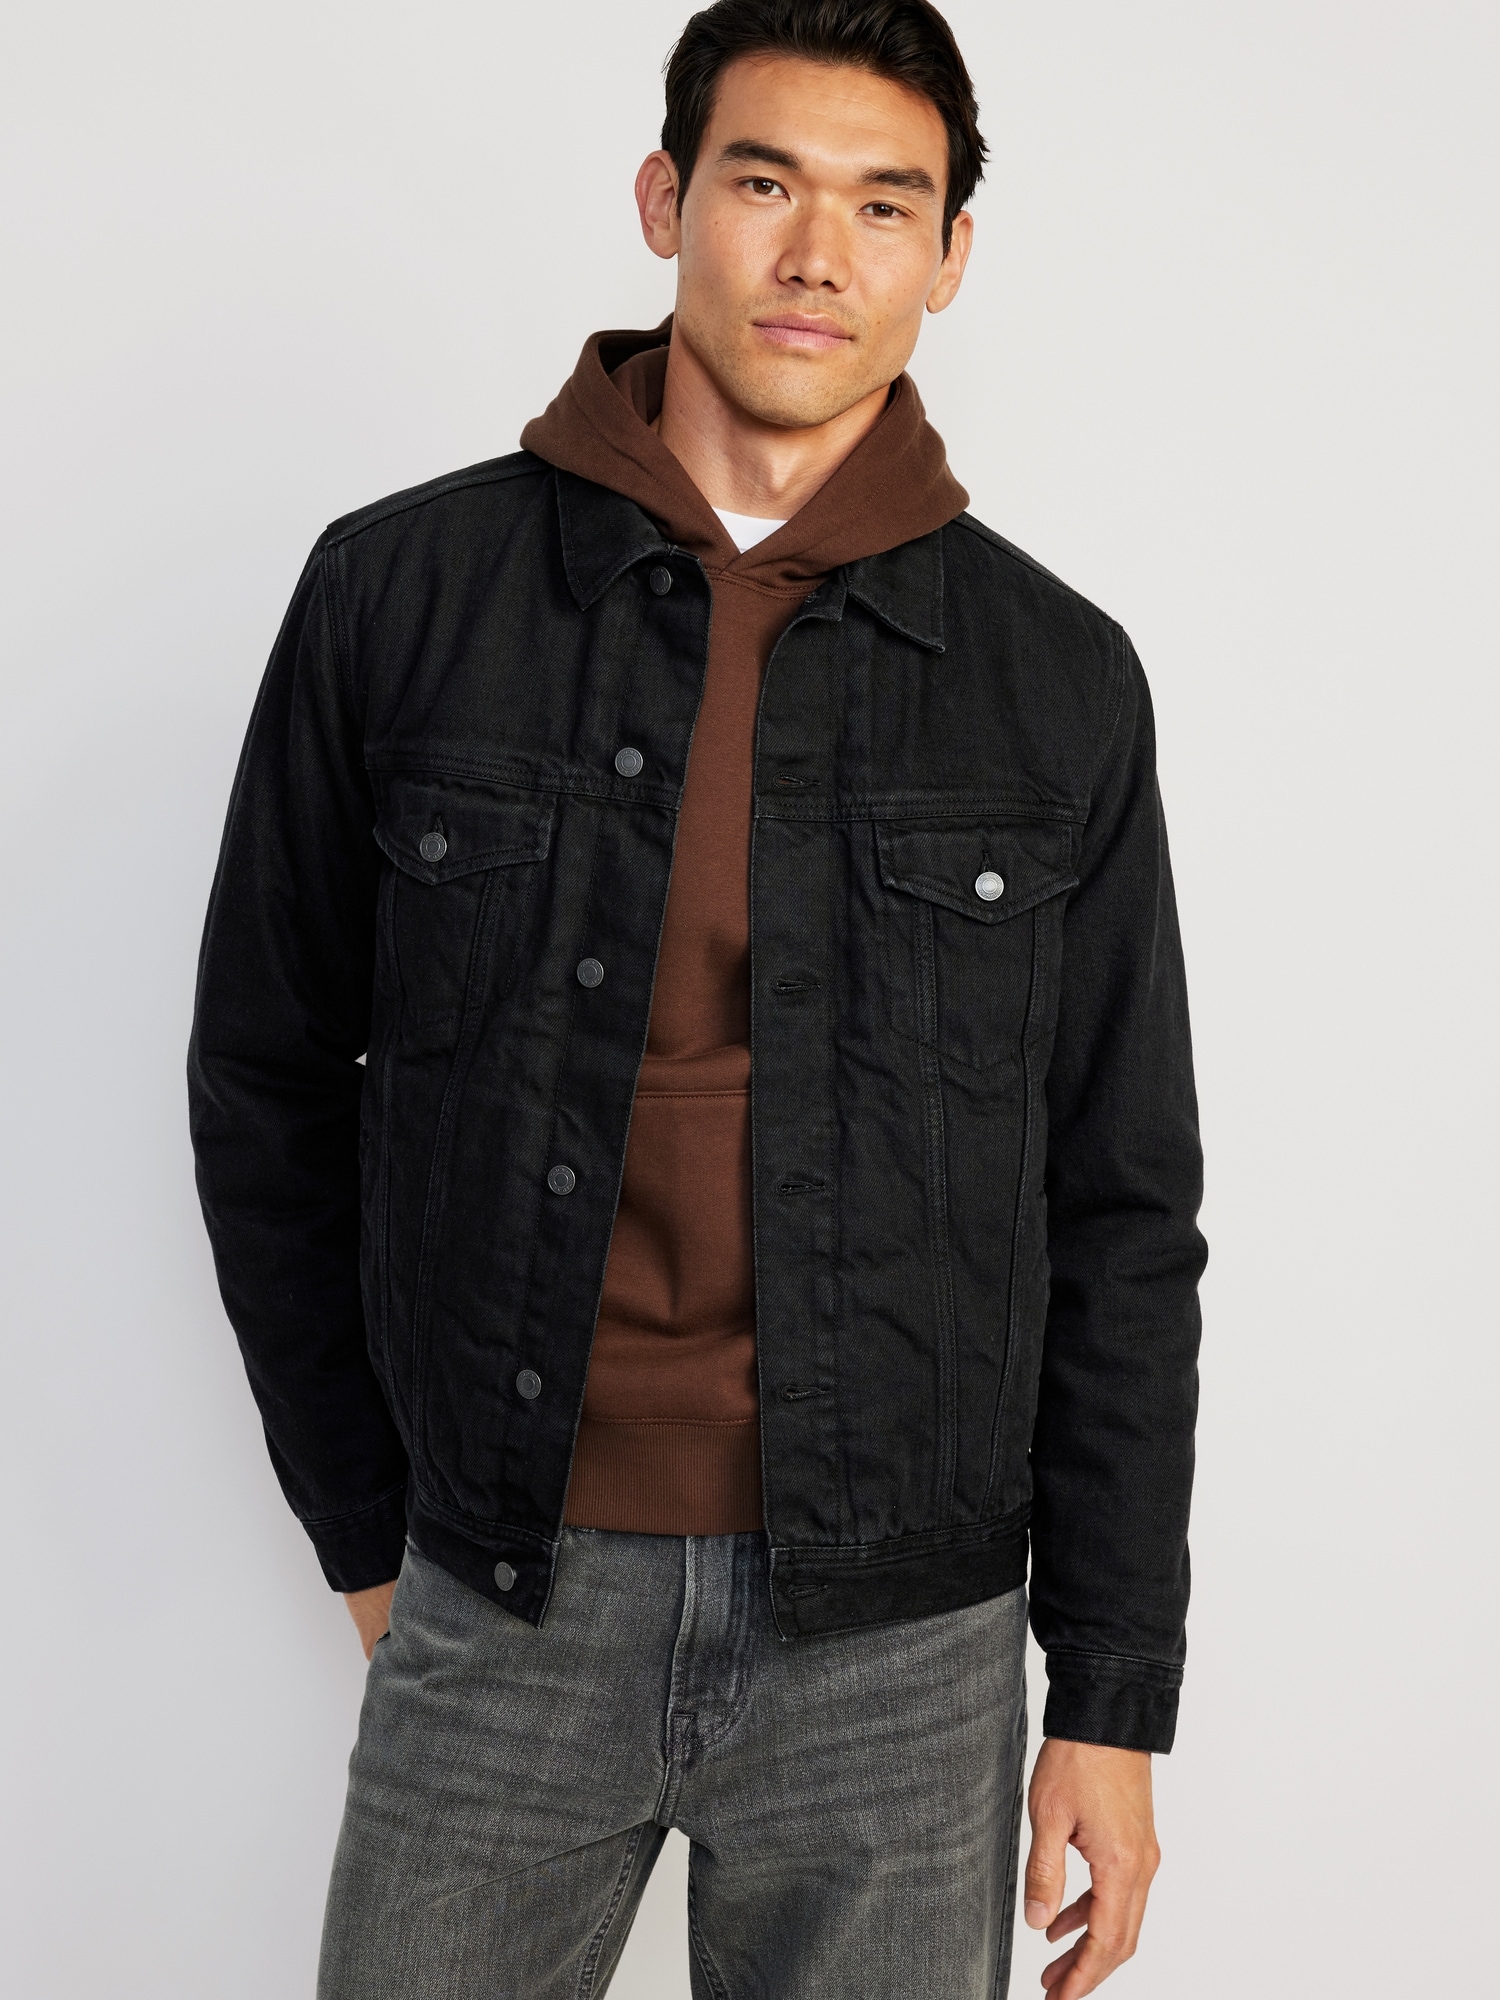 SLAY. Men's Full Sleeves Black Solid Embroidered Button-Down Black Denim  Jacket with Faux-fur Lining